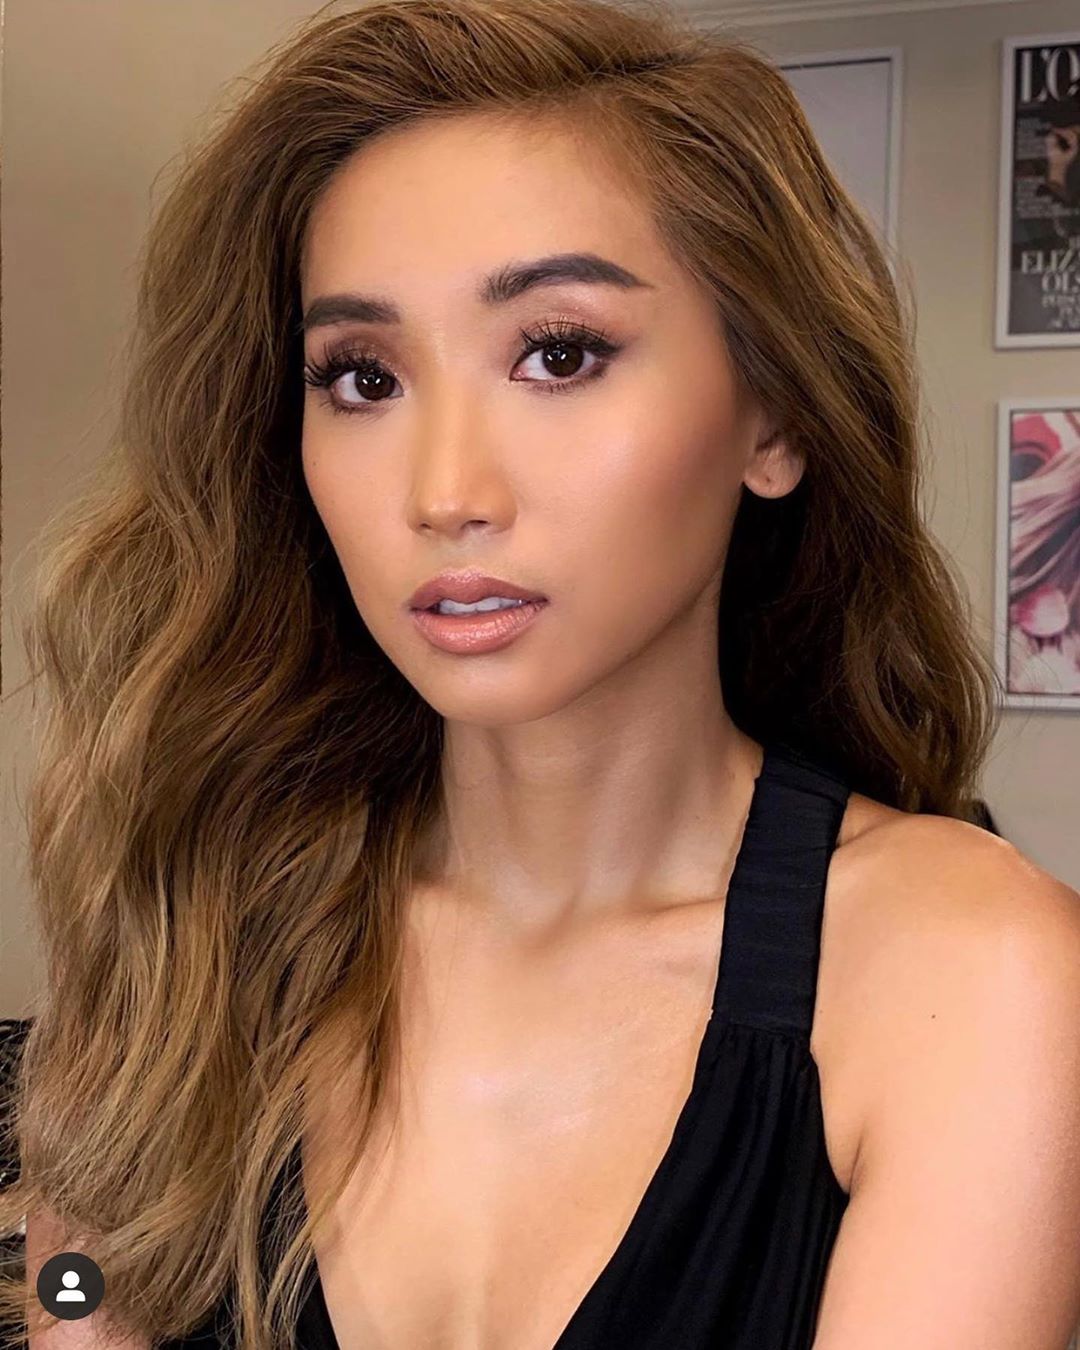 Brenda Song (Actress) Height, Weight, Age, Movies, Biography, News